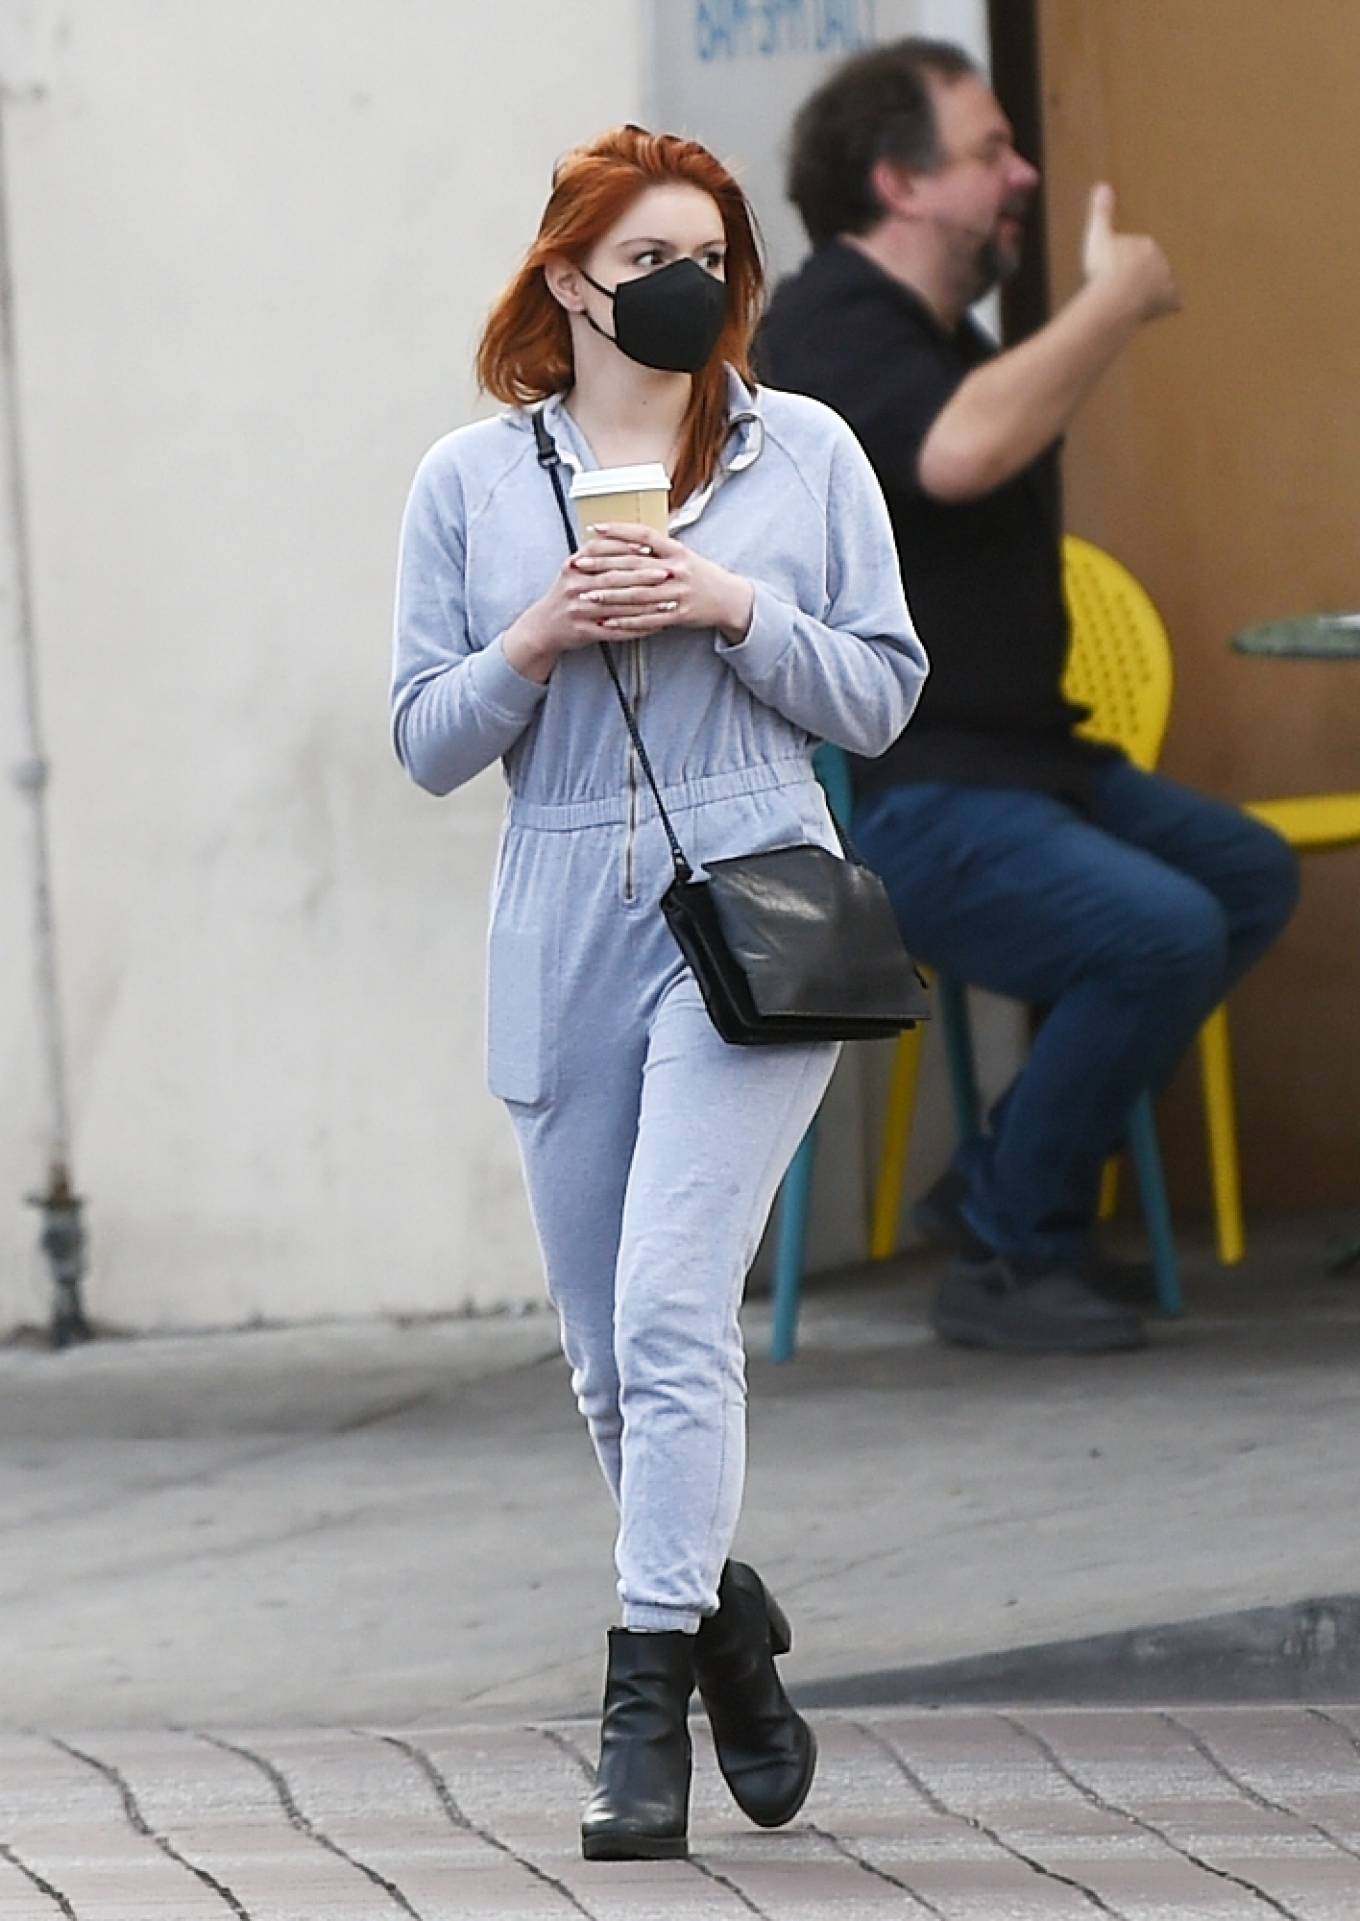 Ariel Winter 2021 : Ariel Winter – Grabs a cup of coffee in West Hollywood-32